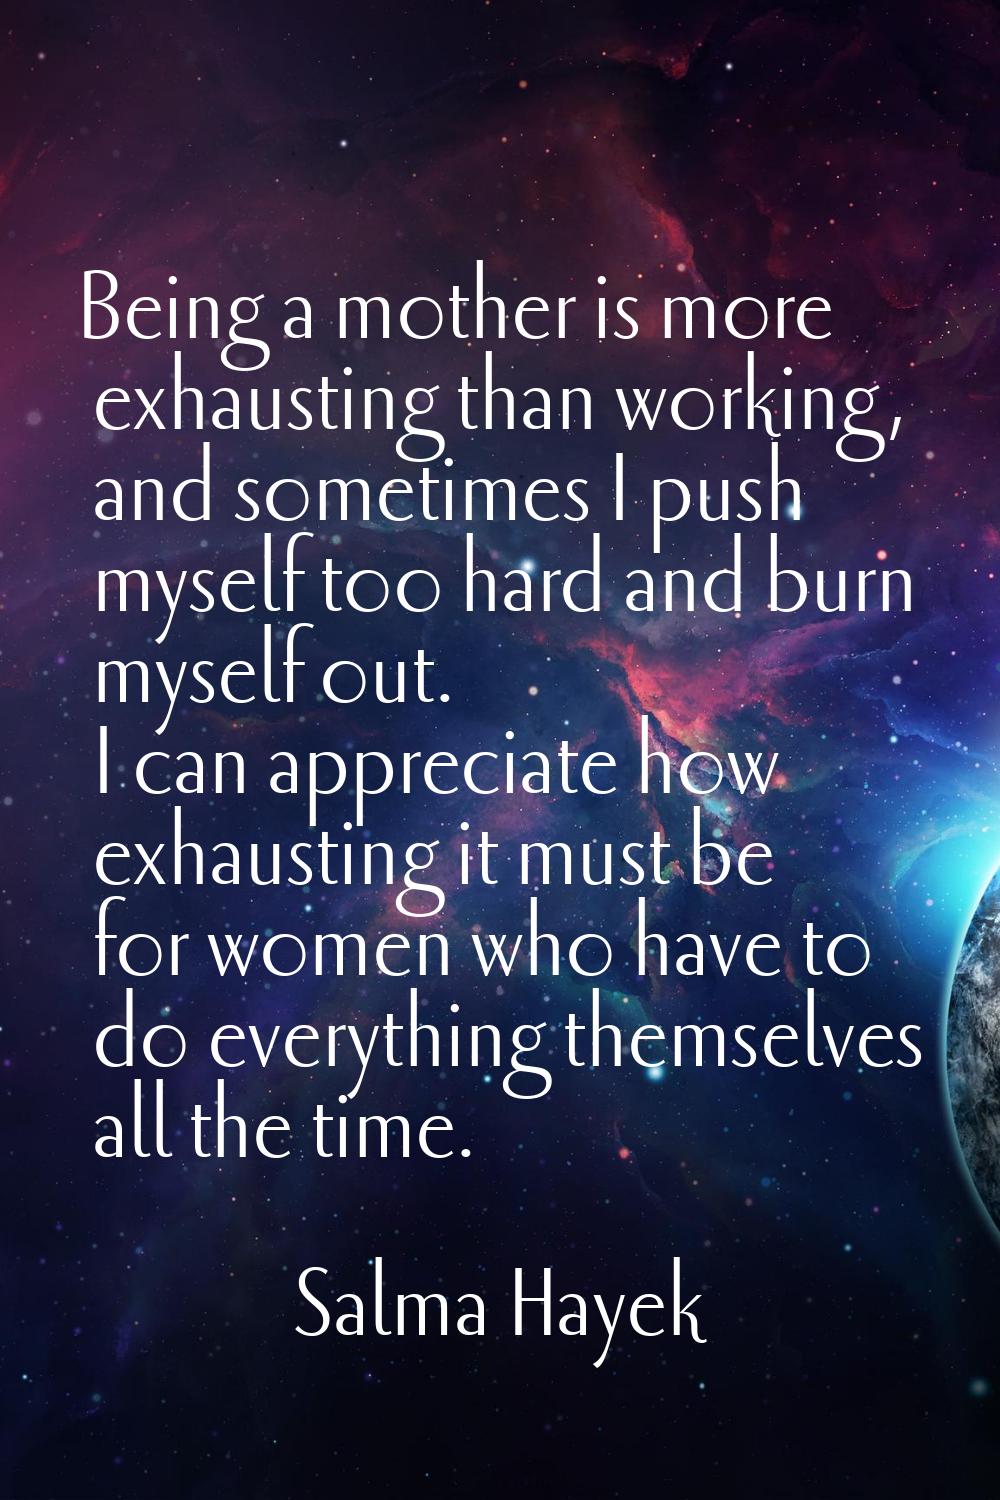 Being a mother is more exhausting than working, and sometimes I push myself too hard and burn mysel